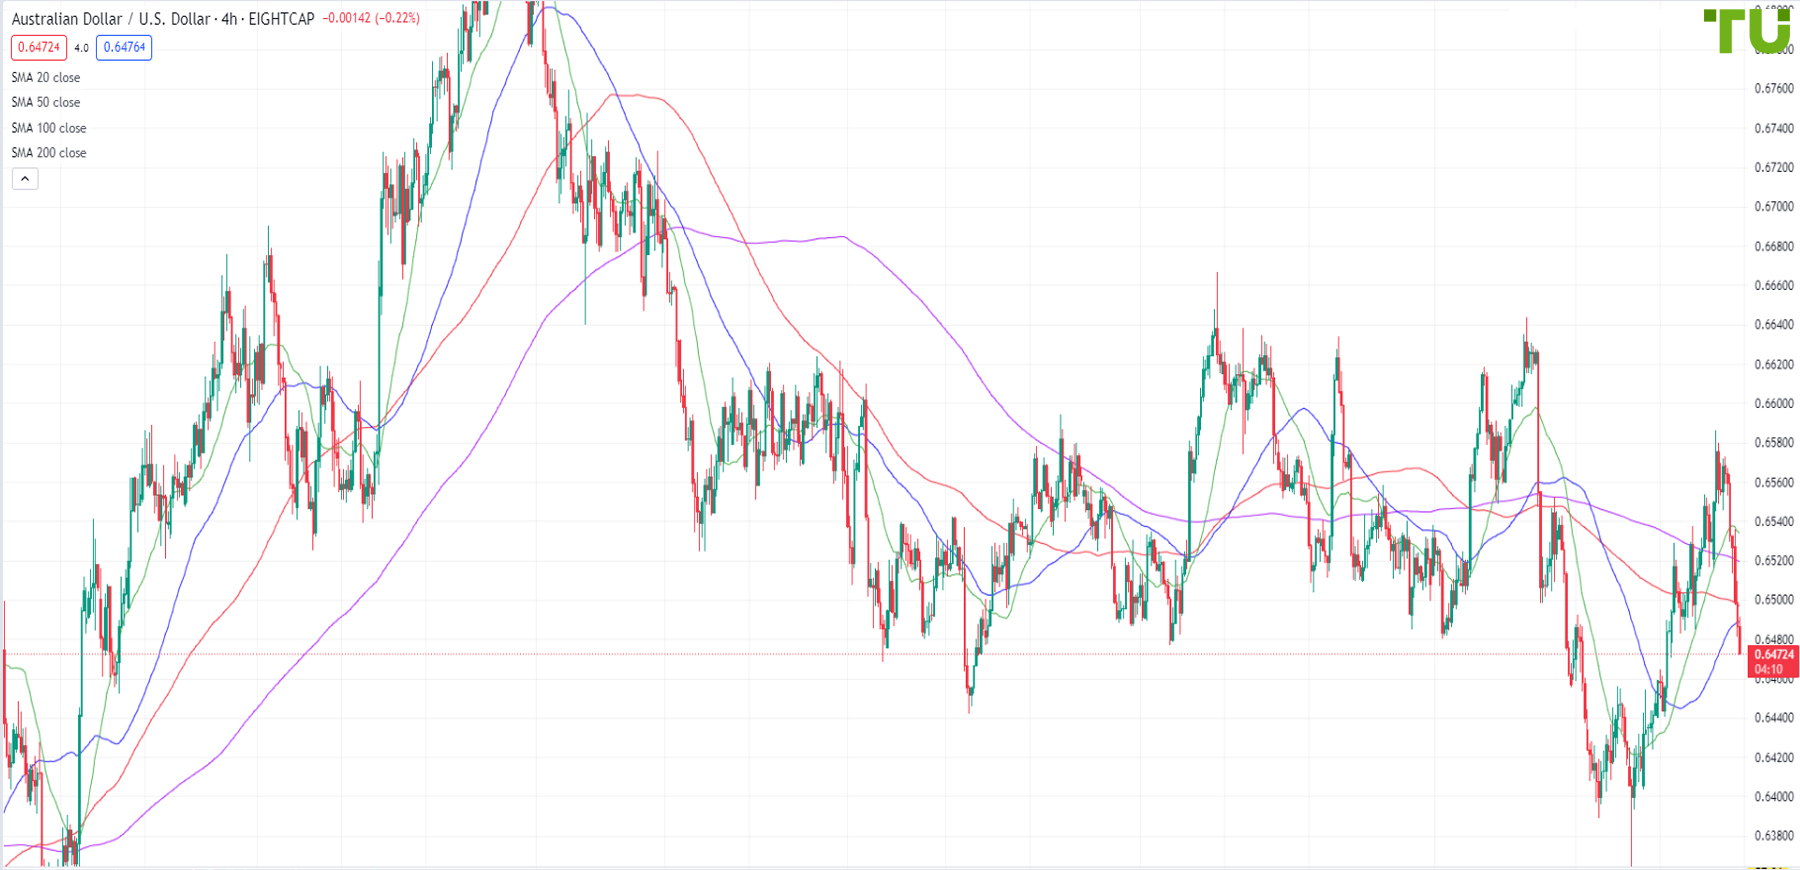 AUD/USD is being sold off